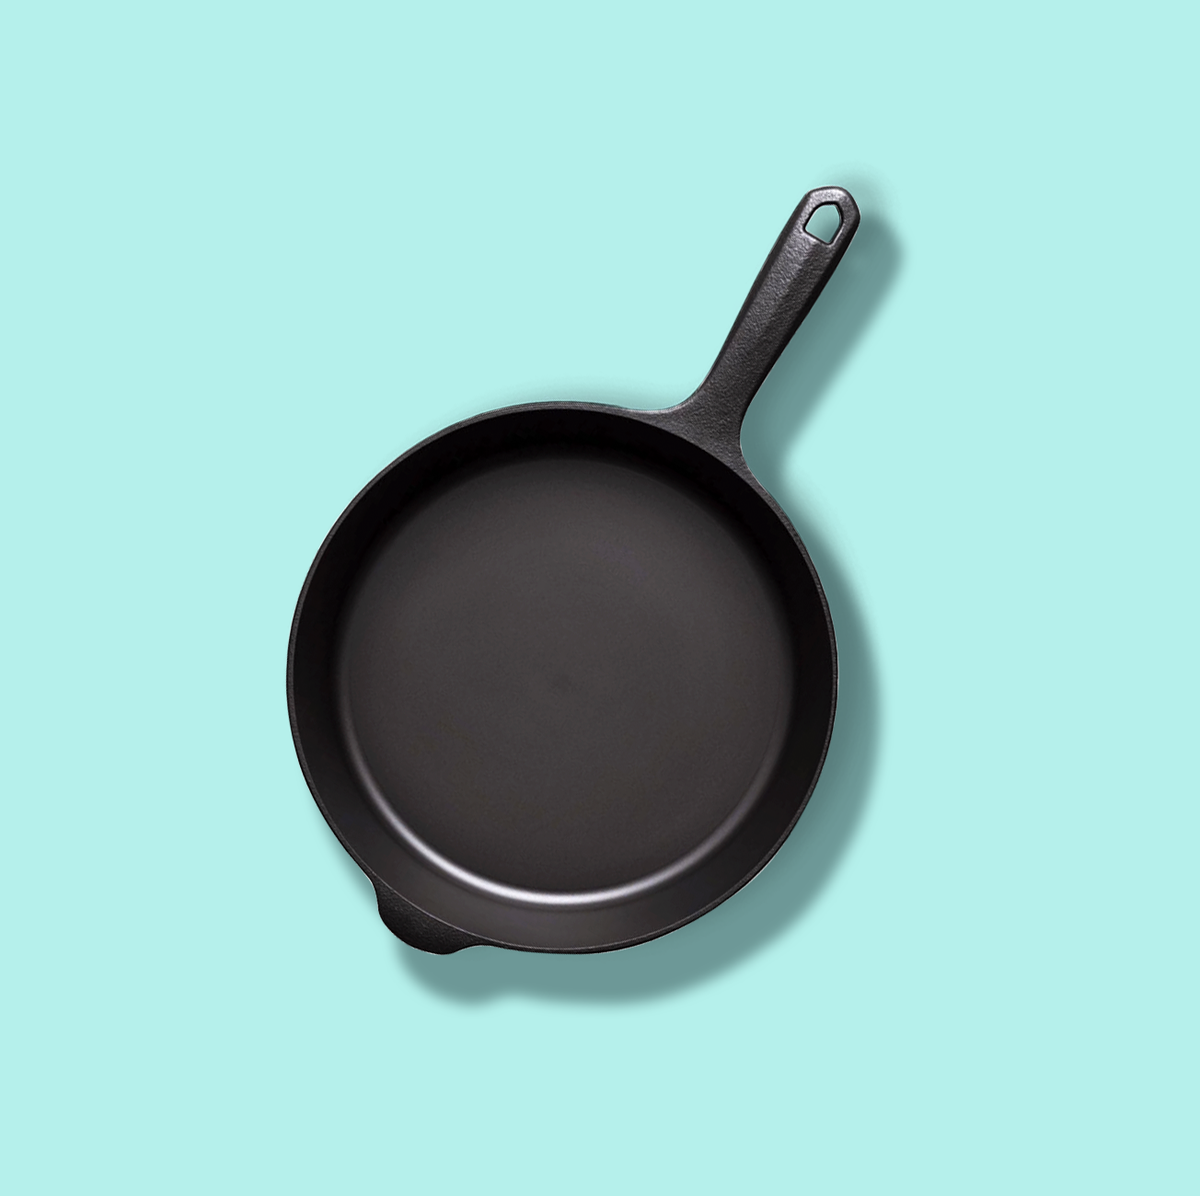 https://hips.hearstapps.com/hmg-prod/images/best-reviewed-cast-iron-skillets-of-2019-1575661432.png?crop=0.652xw:1.00xh;0.175xw,0&resize=1200:*